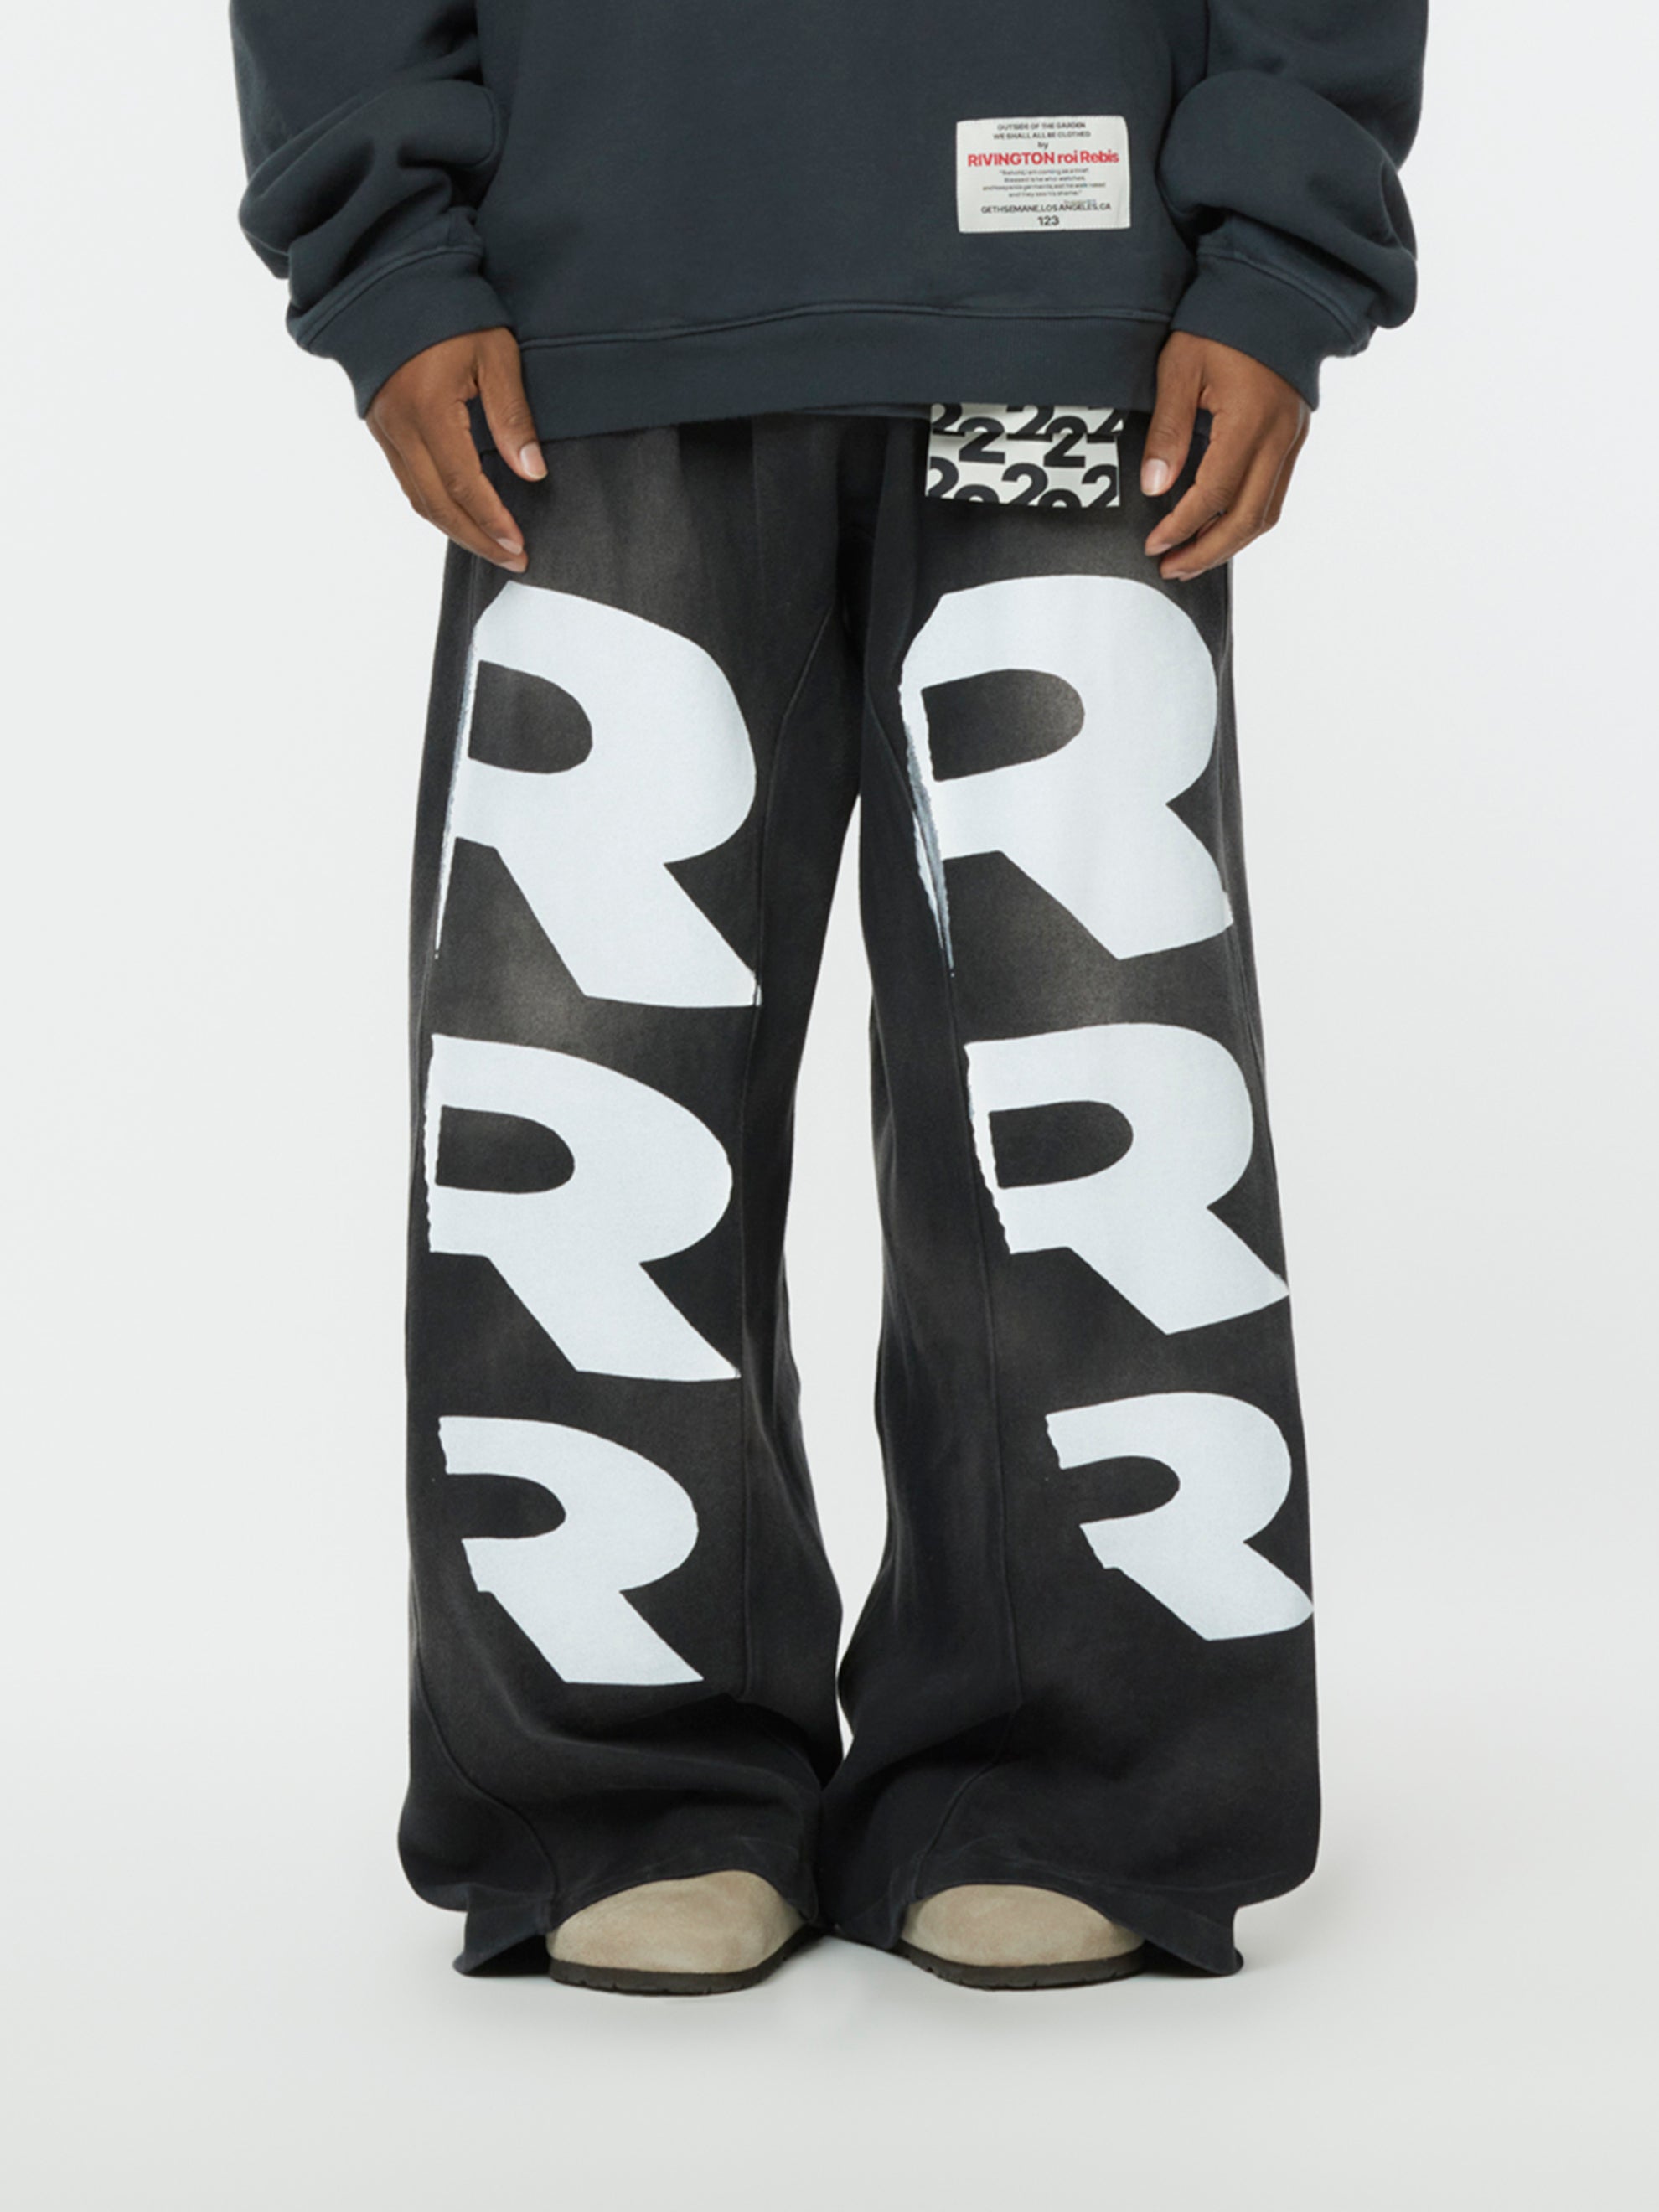 RR Sports Wear - RR Sports Wear welcomes you to buy comfortable yet stylish track  pants that make you look smart and serve comfort to your workout sessions.  Visit: https://www.rrsportswear.com/ #trackpants #RRSports #